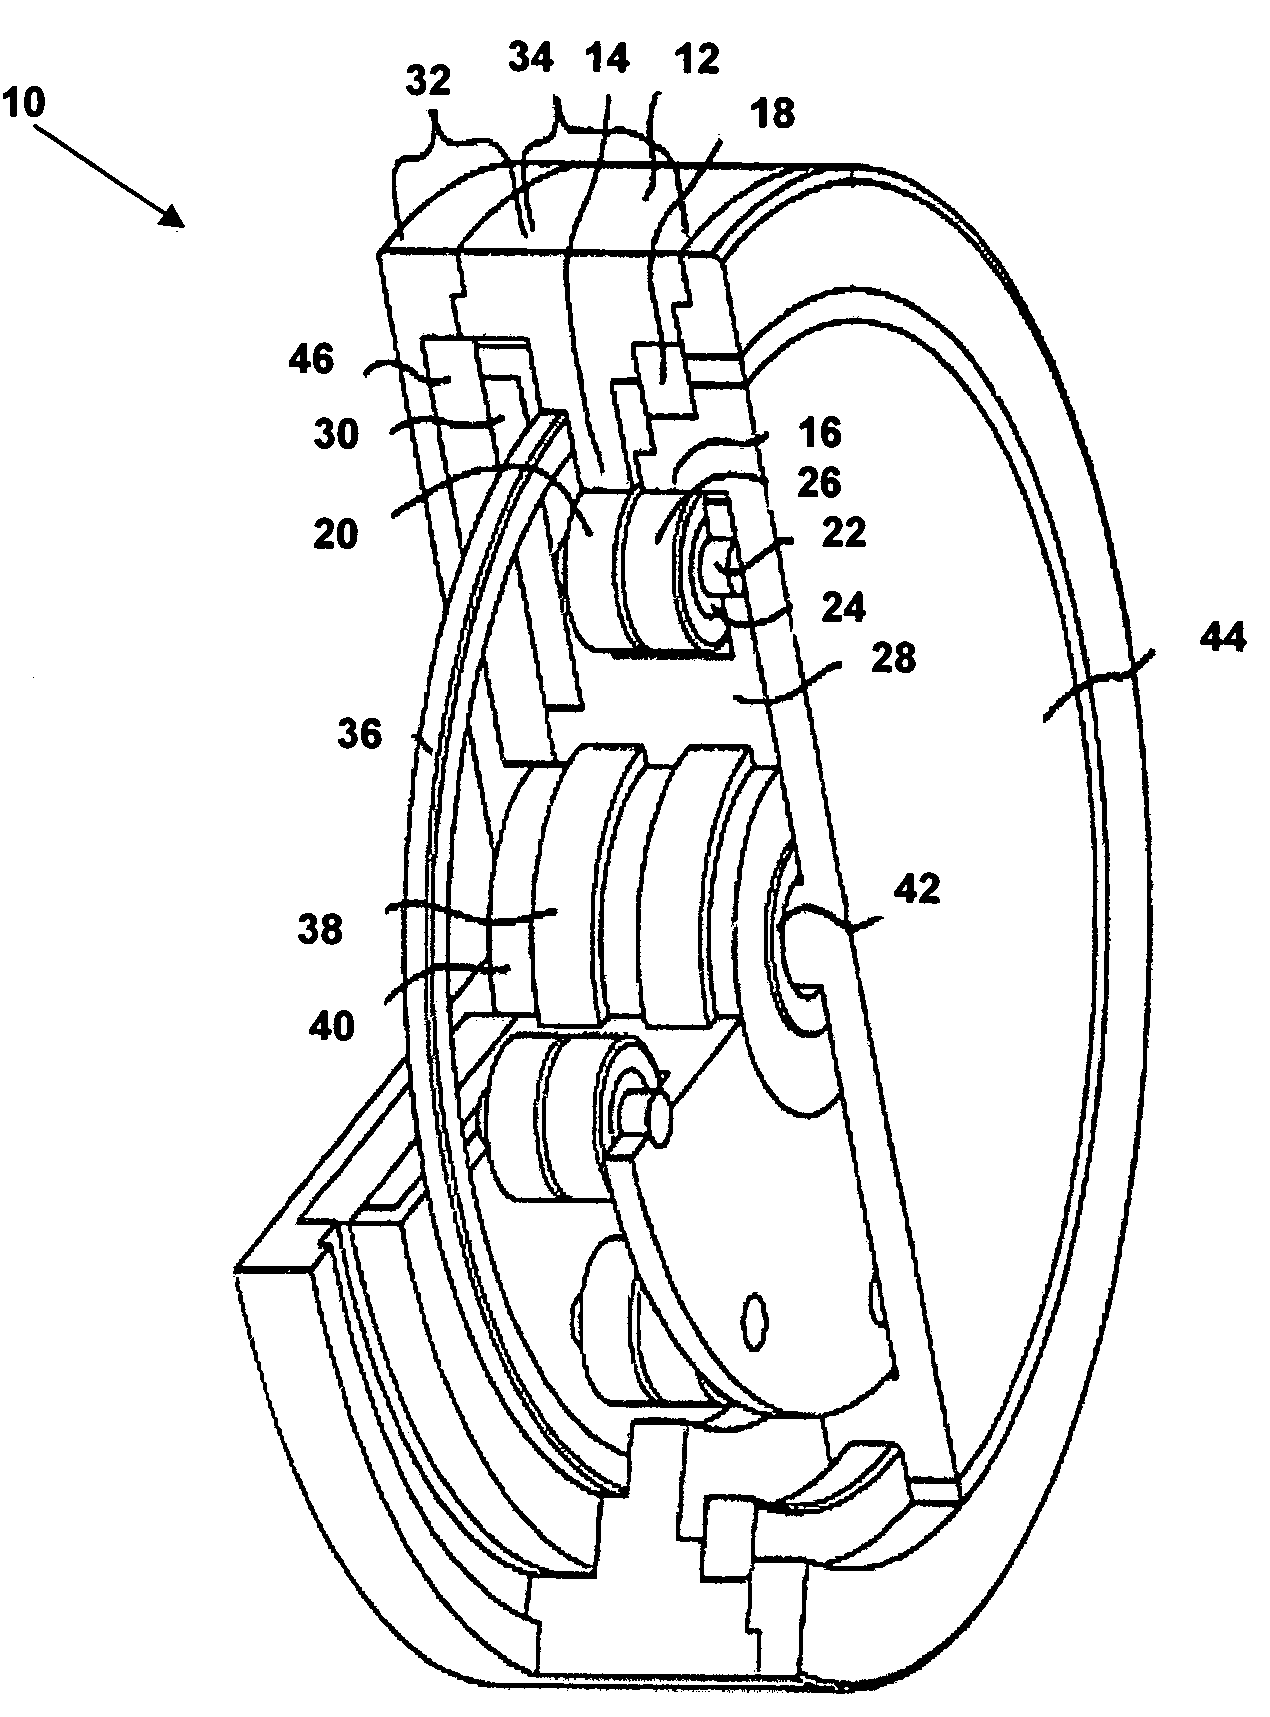 Self-contained rotary actuator